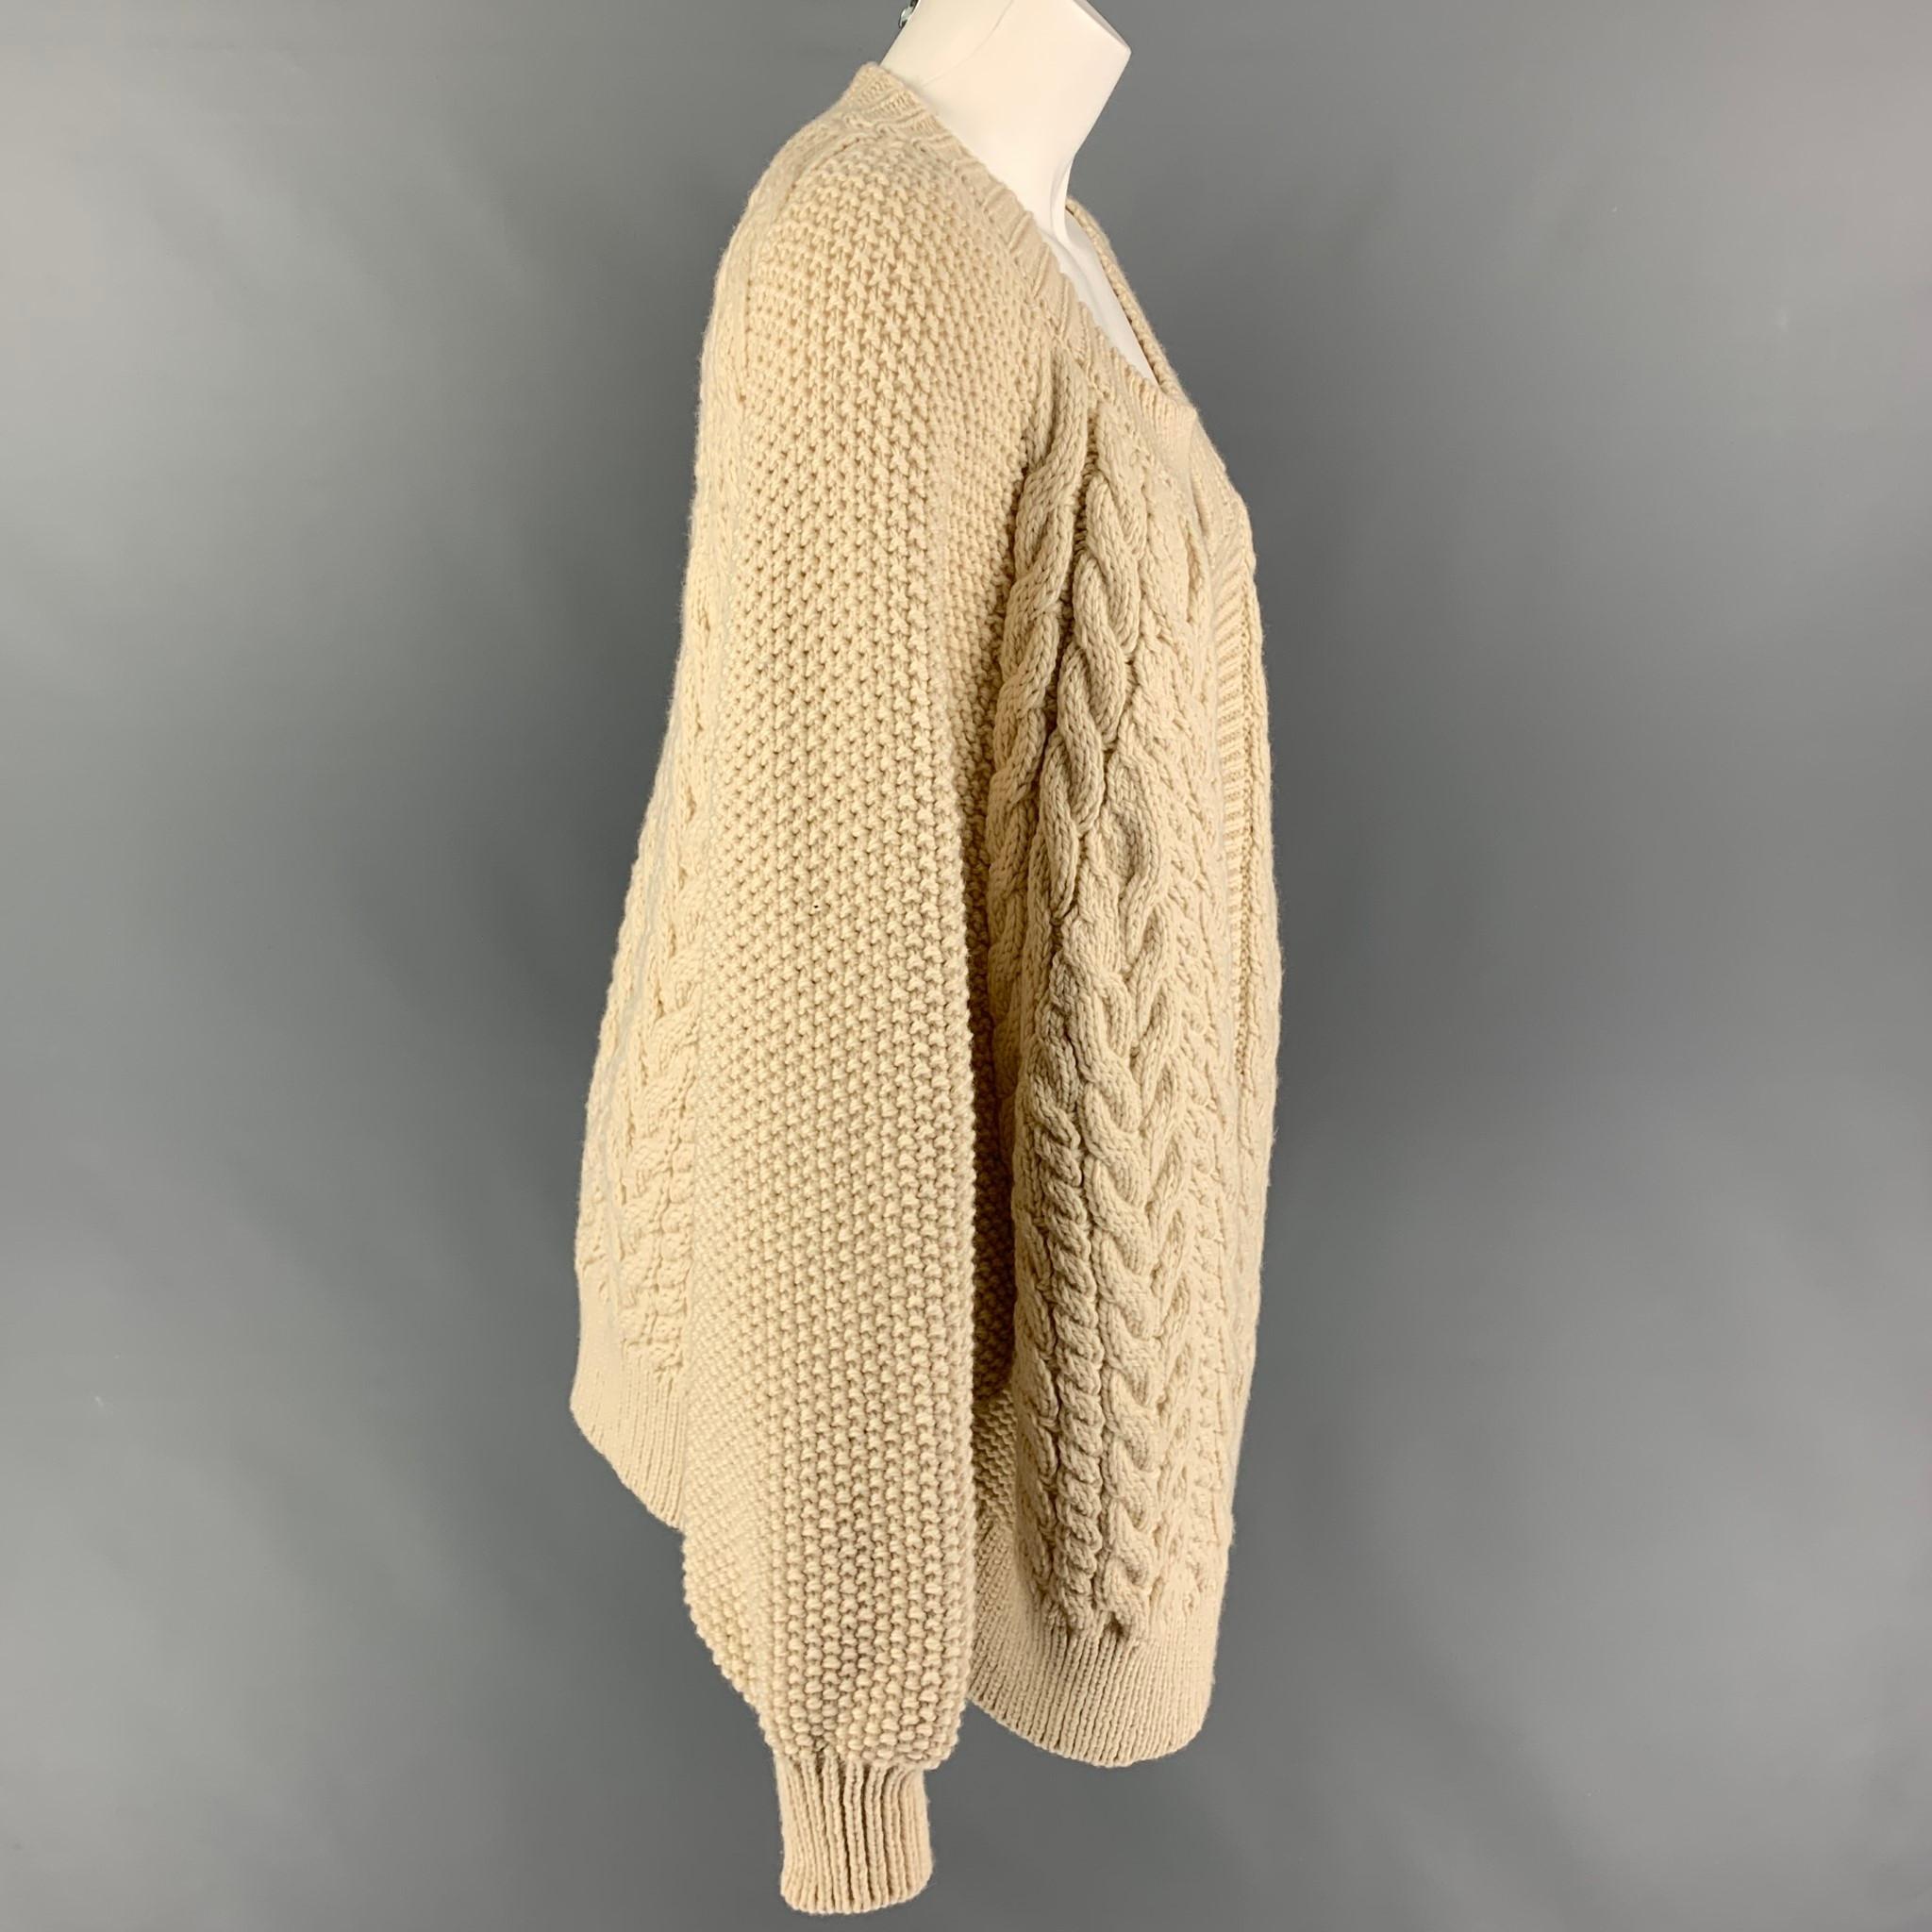 MR. MITTEN cardigan comes in a beige knitted wool featuring a oversized fit, collarless, and a open front. 

Very Good Pre-Owned Condition. Light mark at front. As-Is.
Marked: One Size

Measurements:

Shoulder: 18 in.
Bust: 52 in.
Sleeve: 30